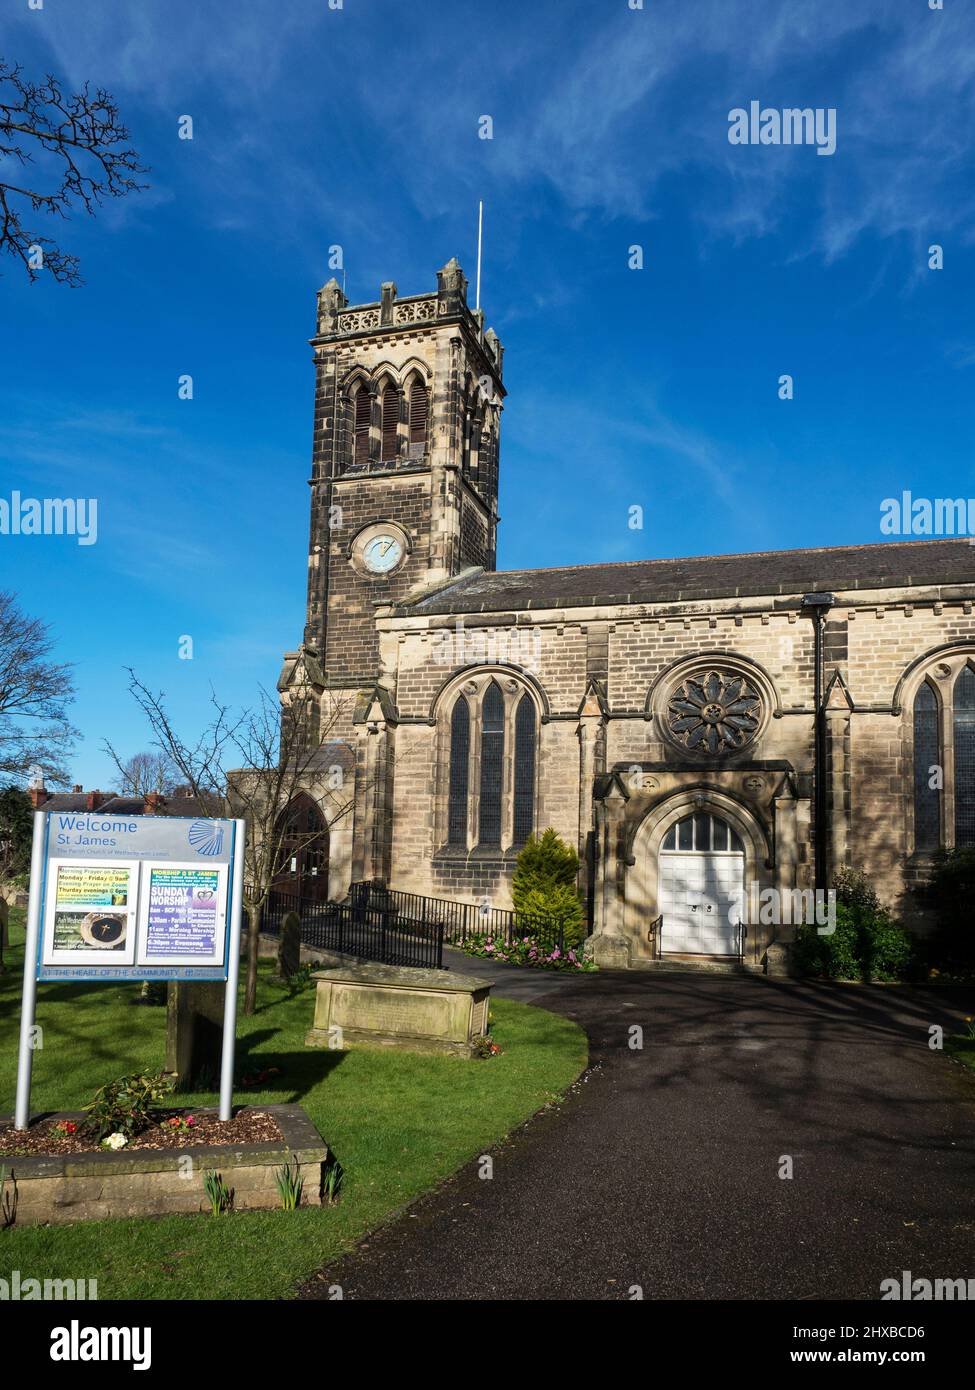 La Chiesa di St James a Wetherby West Yorkshire Inghilterra Foto Stock